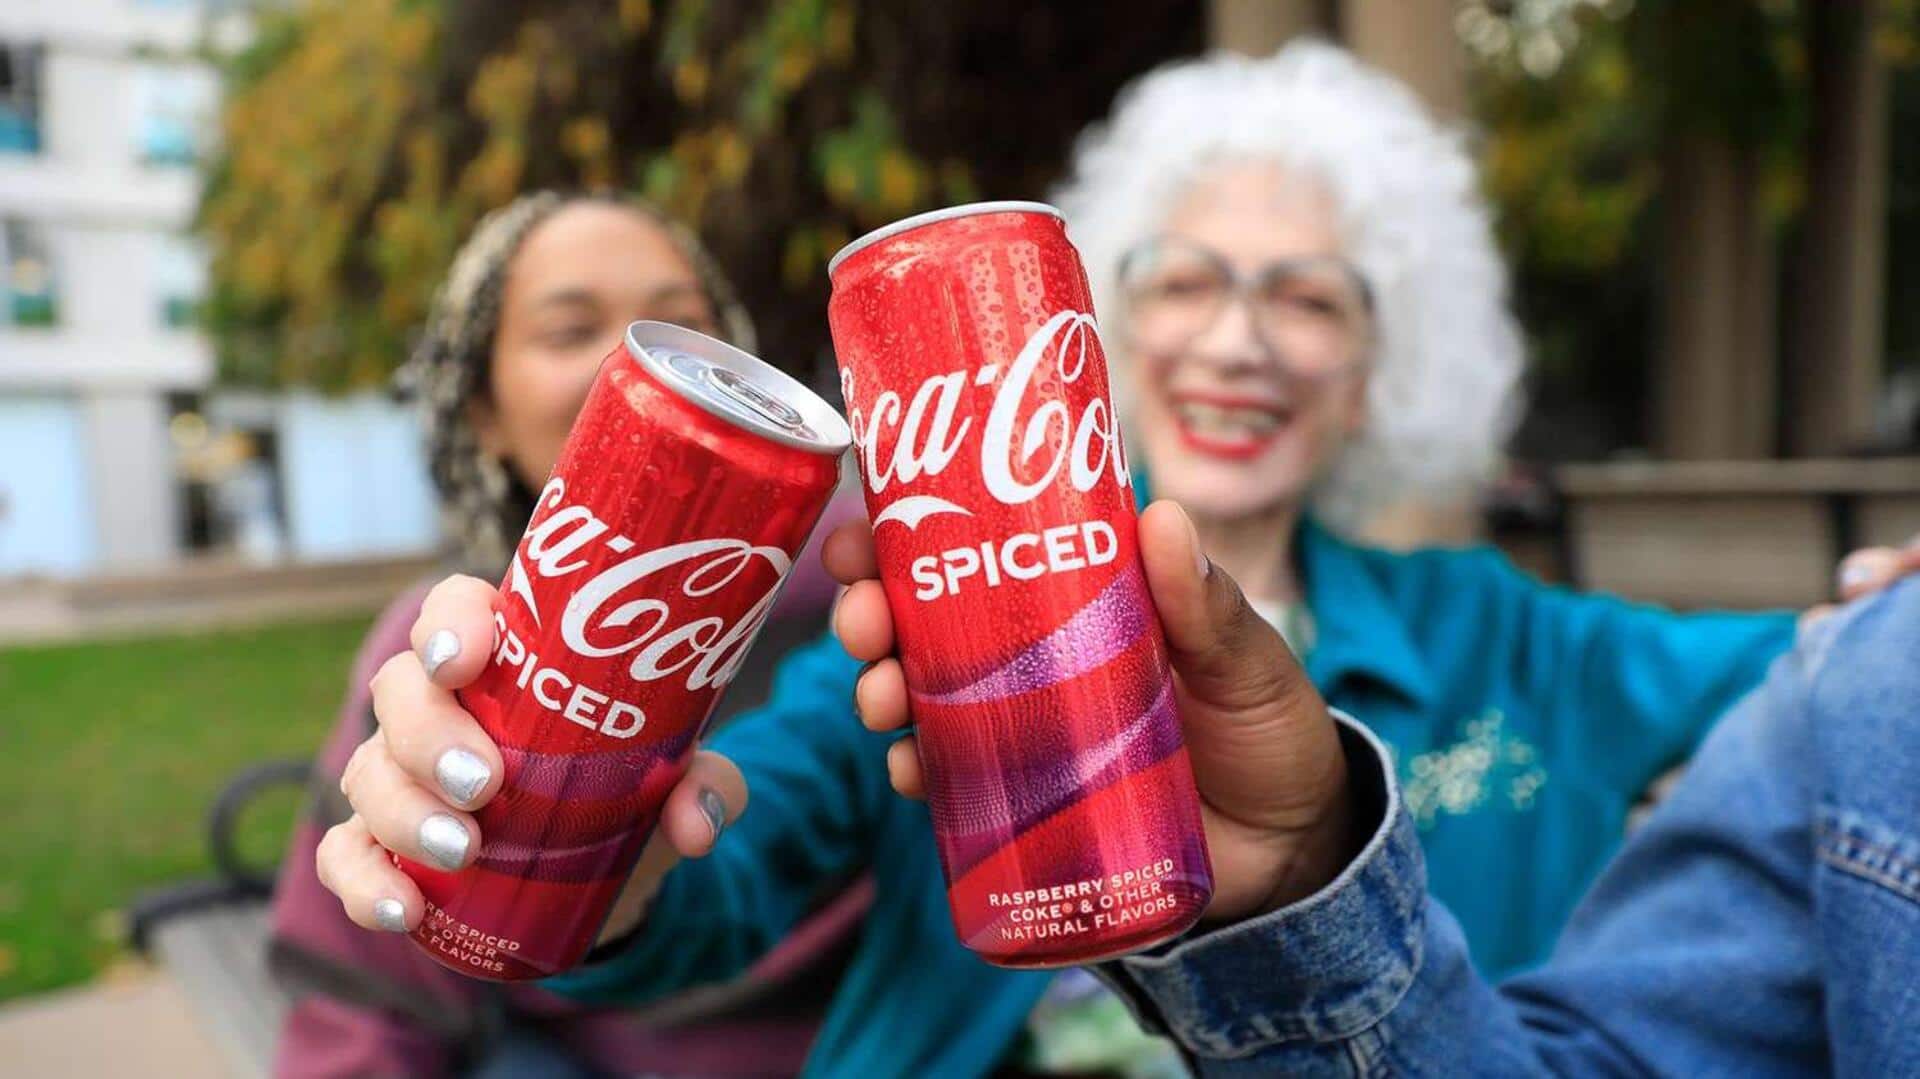 Coca-Cola introduces 'Spiced' version in North America: What's so special?